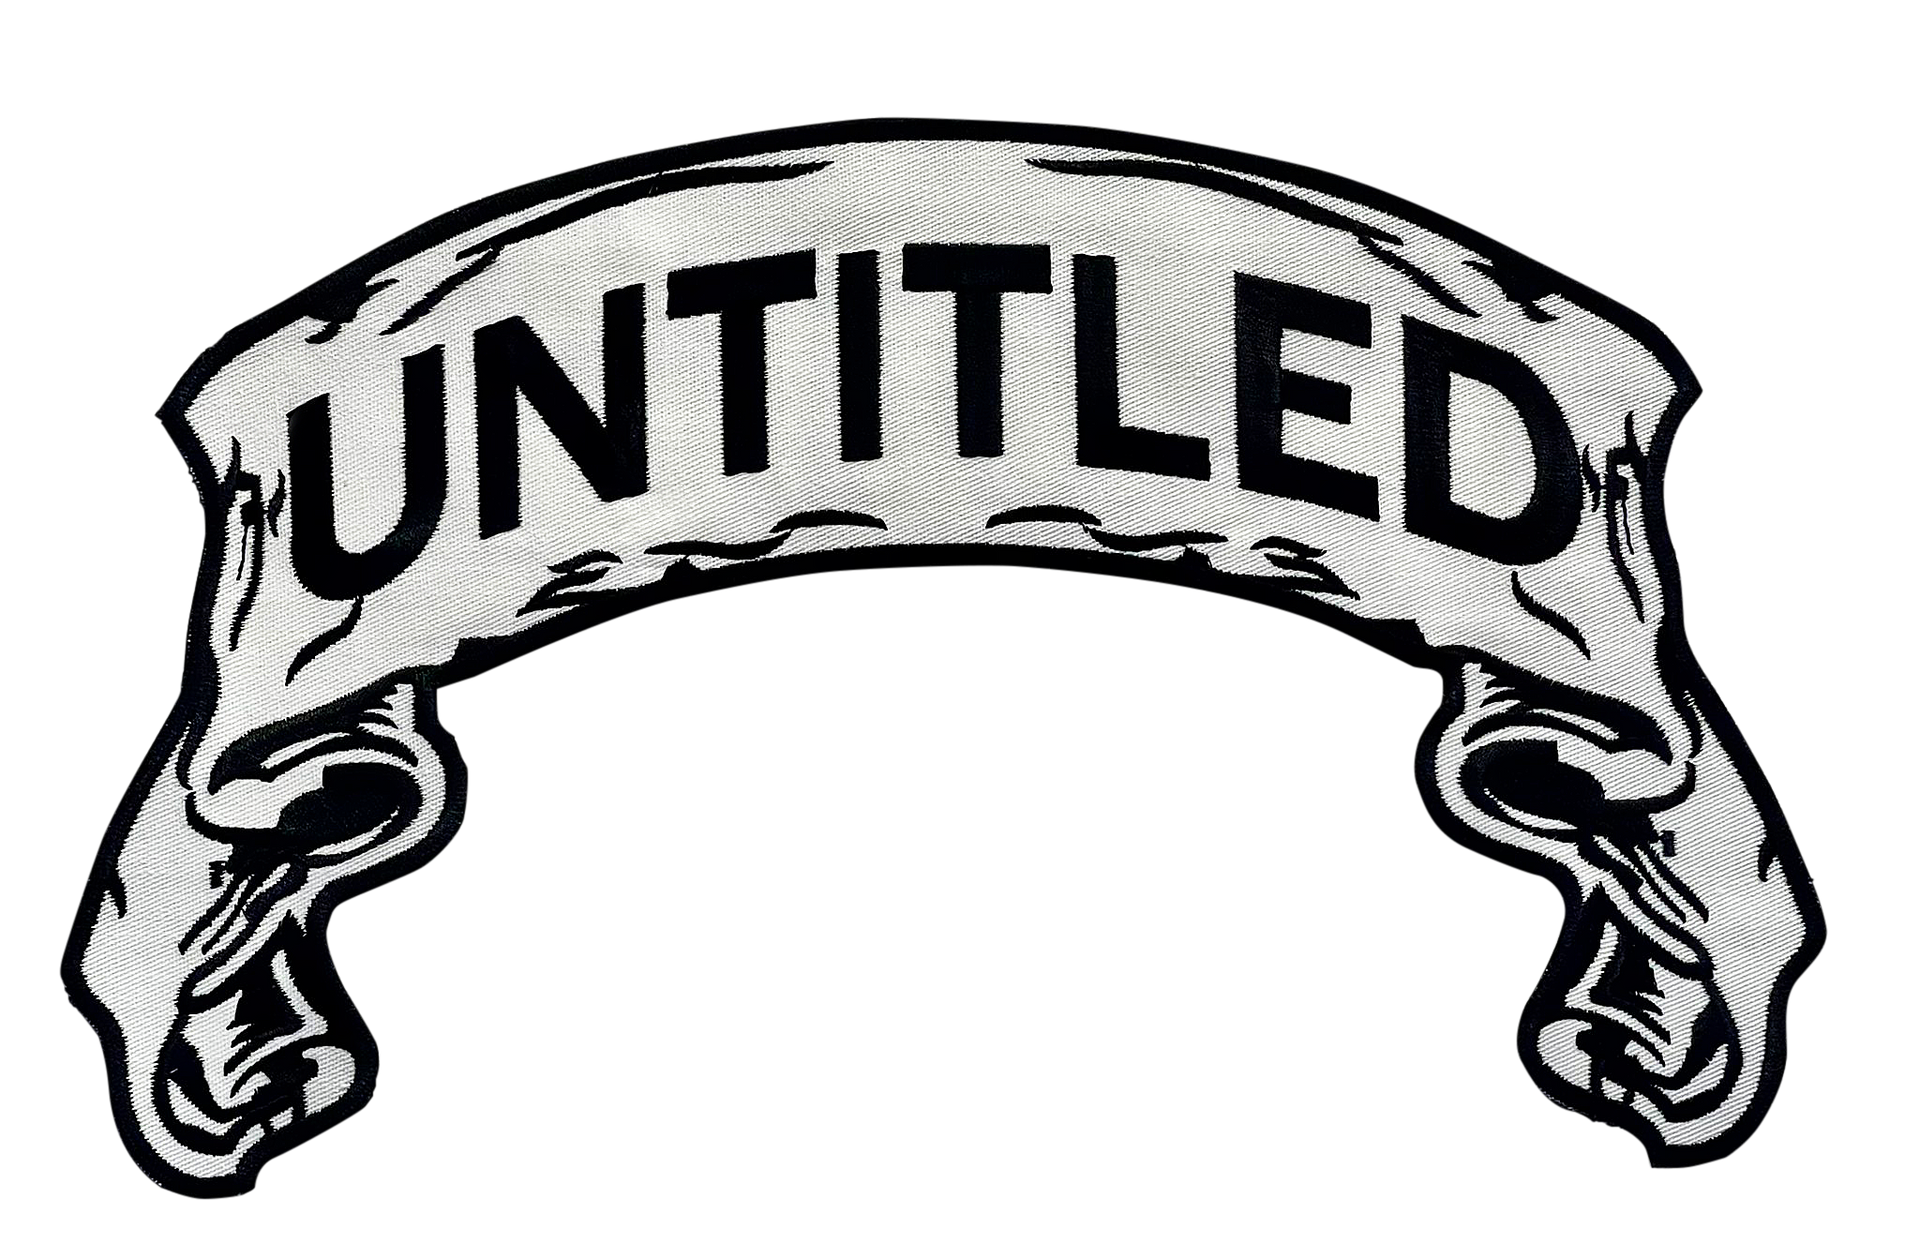 A black and white drawing of a banner that says untitled